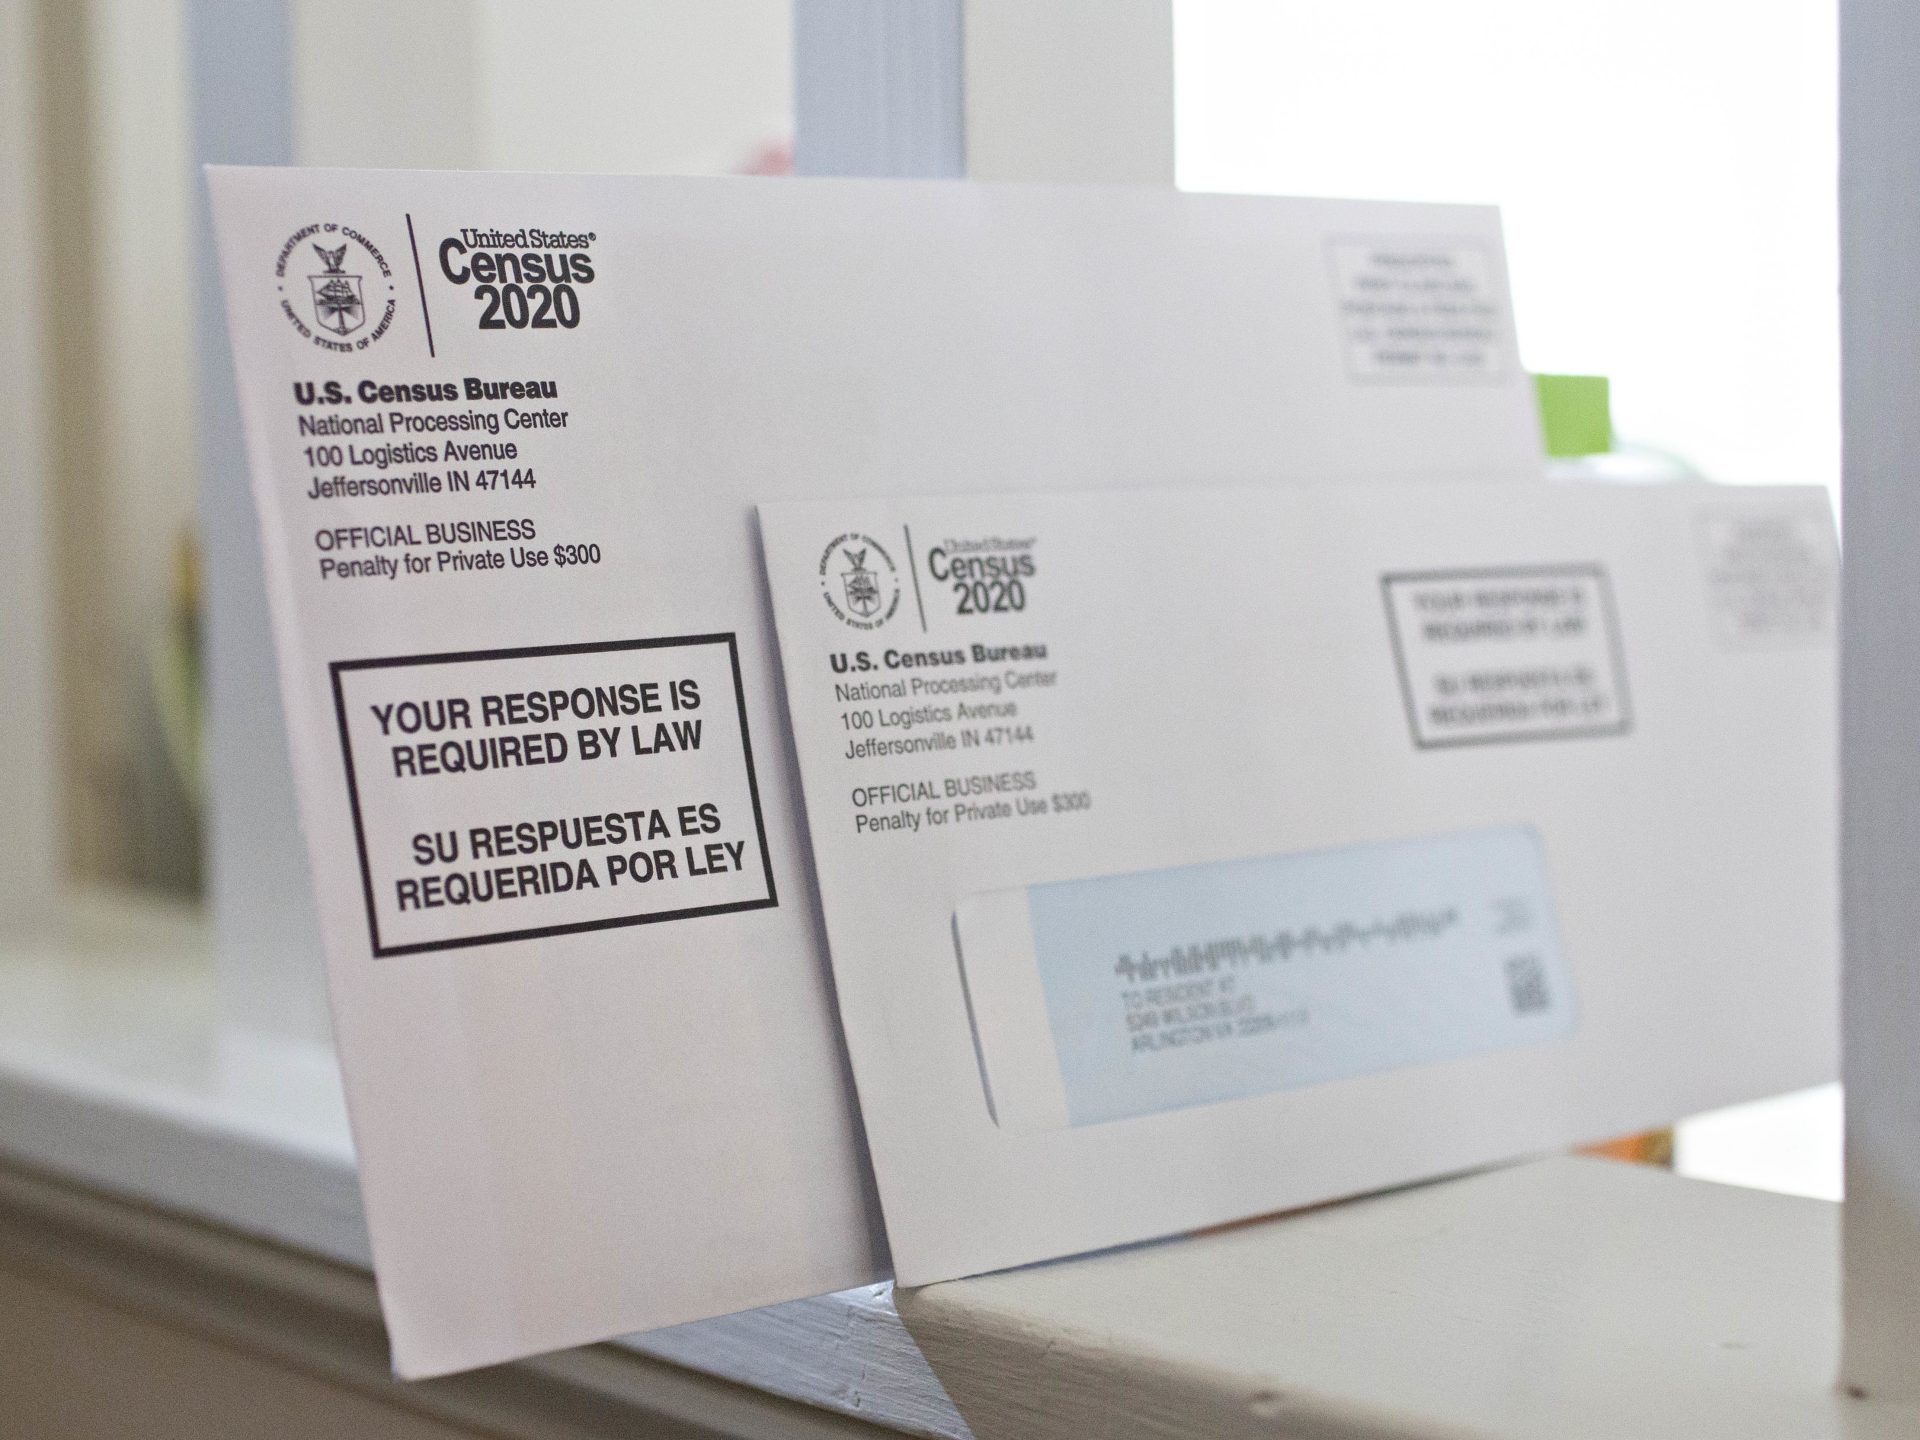 Amid mail delivery delays, the U.S. Census Bureau is planning to send additional paper forms to some households that have not yet responded to the 2020 census.